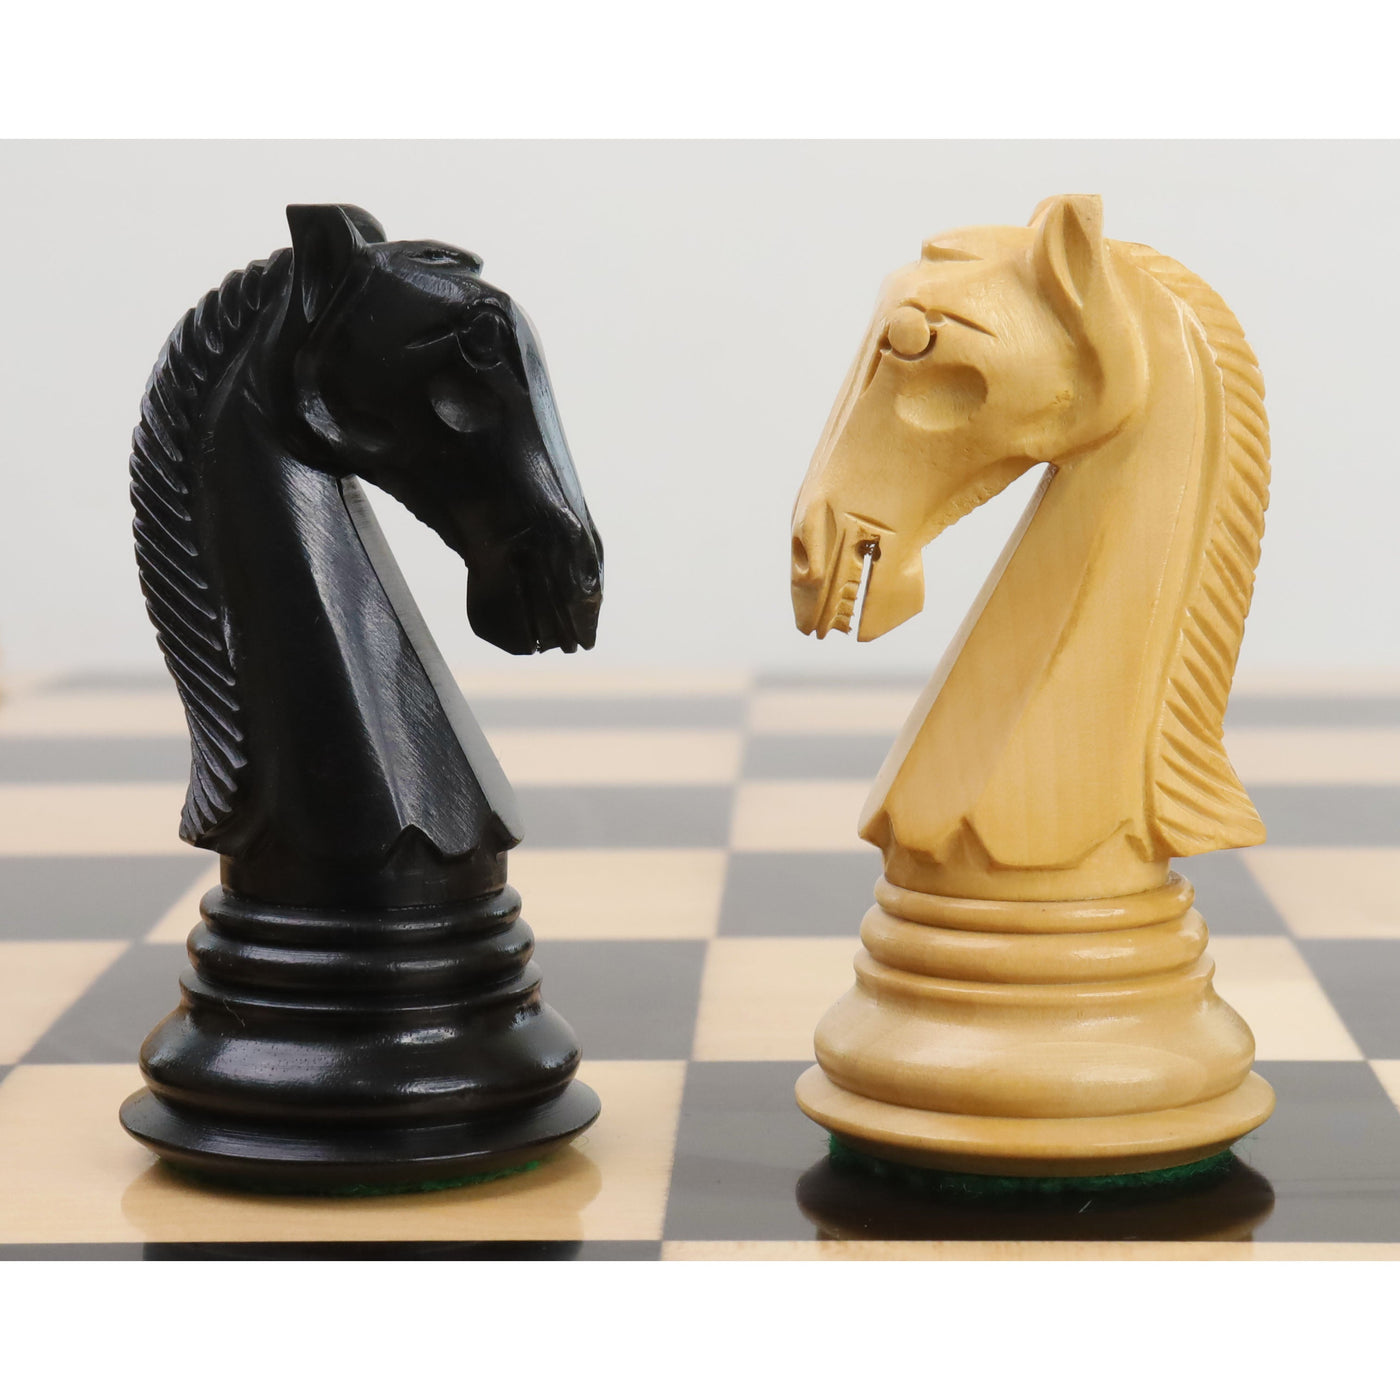 Slightly Imperfect 3.9" New Columbian Staunton Chess Set - Chess Pieces Only - Ebony Wood - Double Weighted